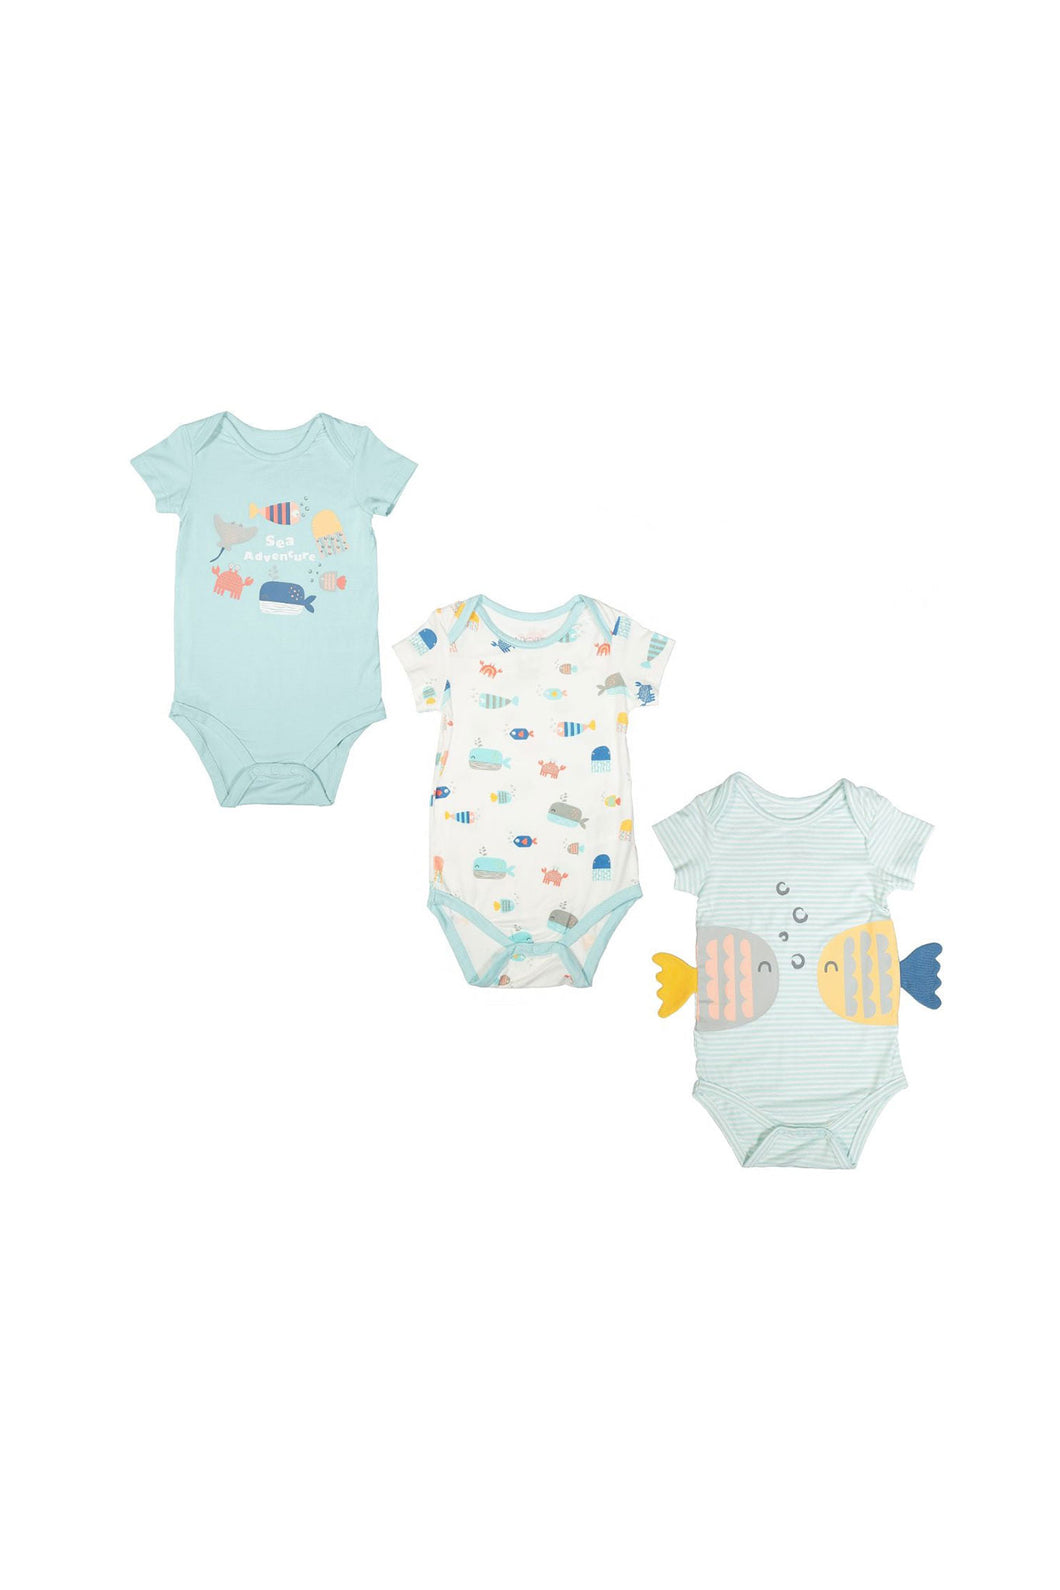 Not Too Big Sea World Bamboo Bodysuits SS - 3 Pack